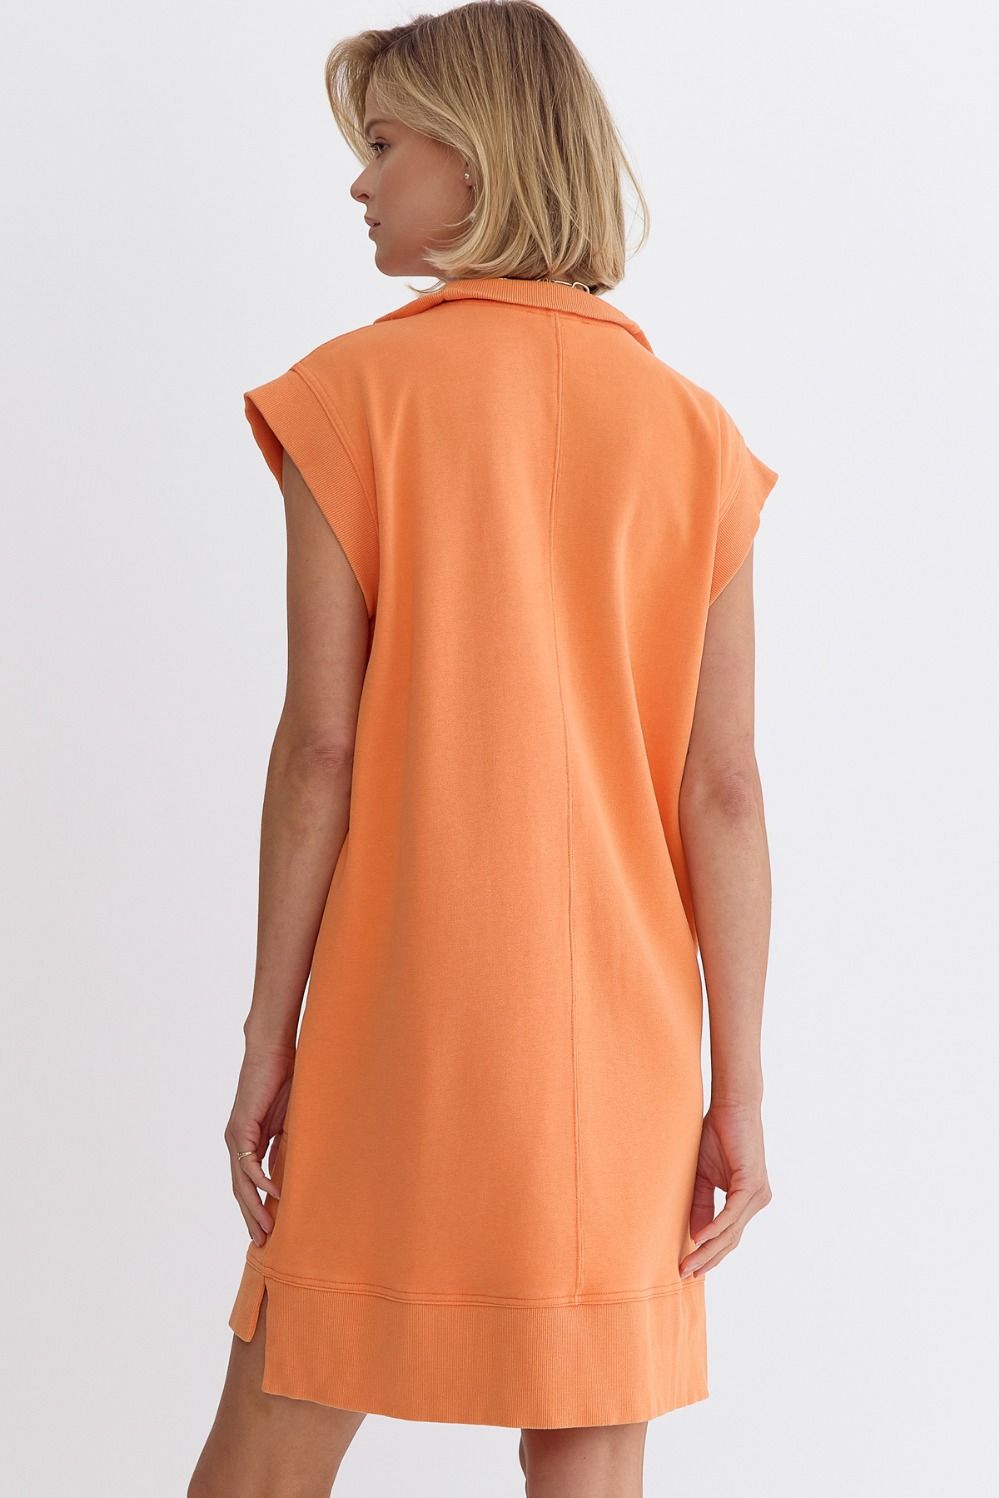 tennessee gameday zip up dress orange -  back view